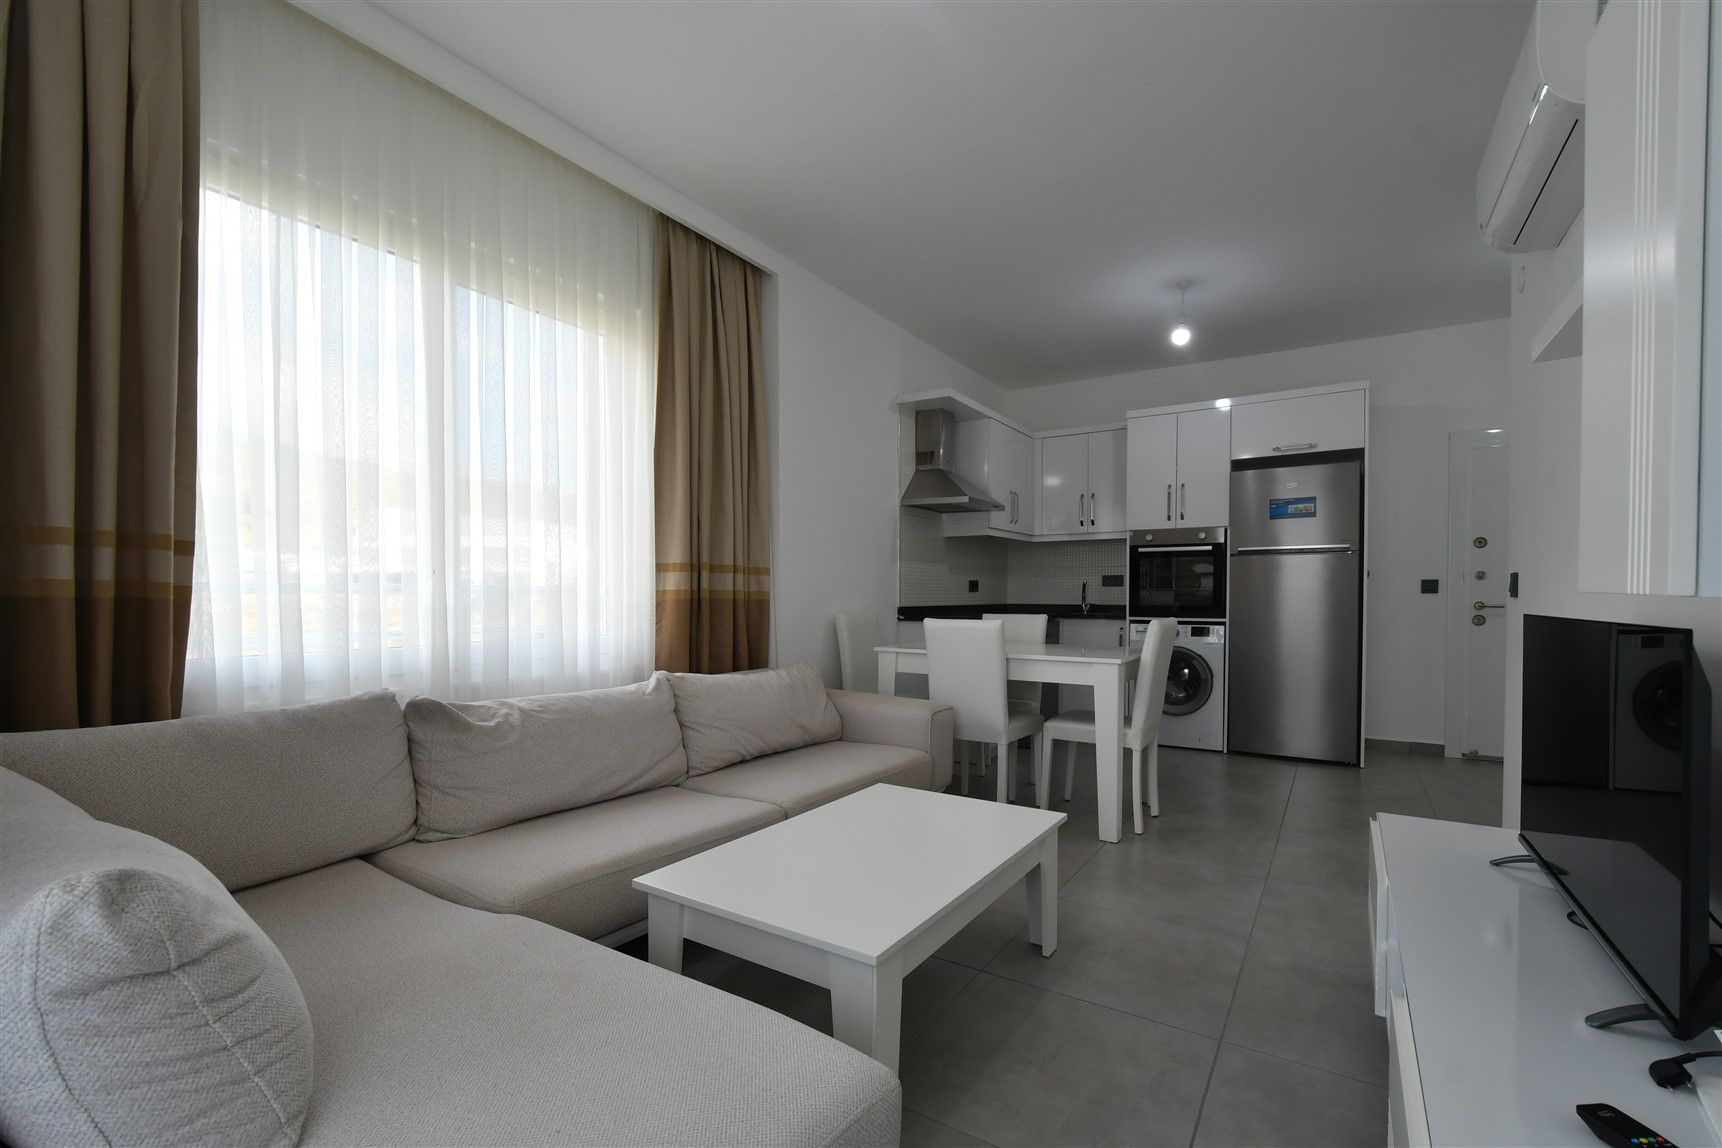 Furnished apartment in an excellent location - popular Mahmutlar district